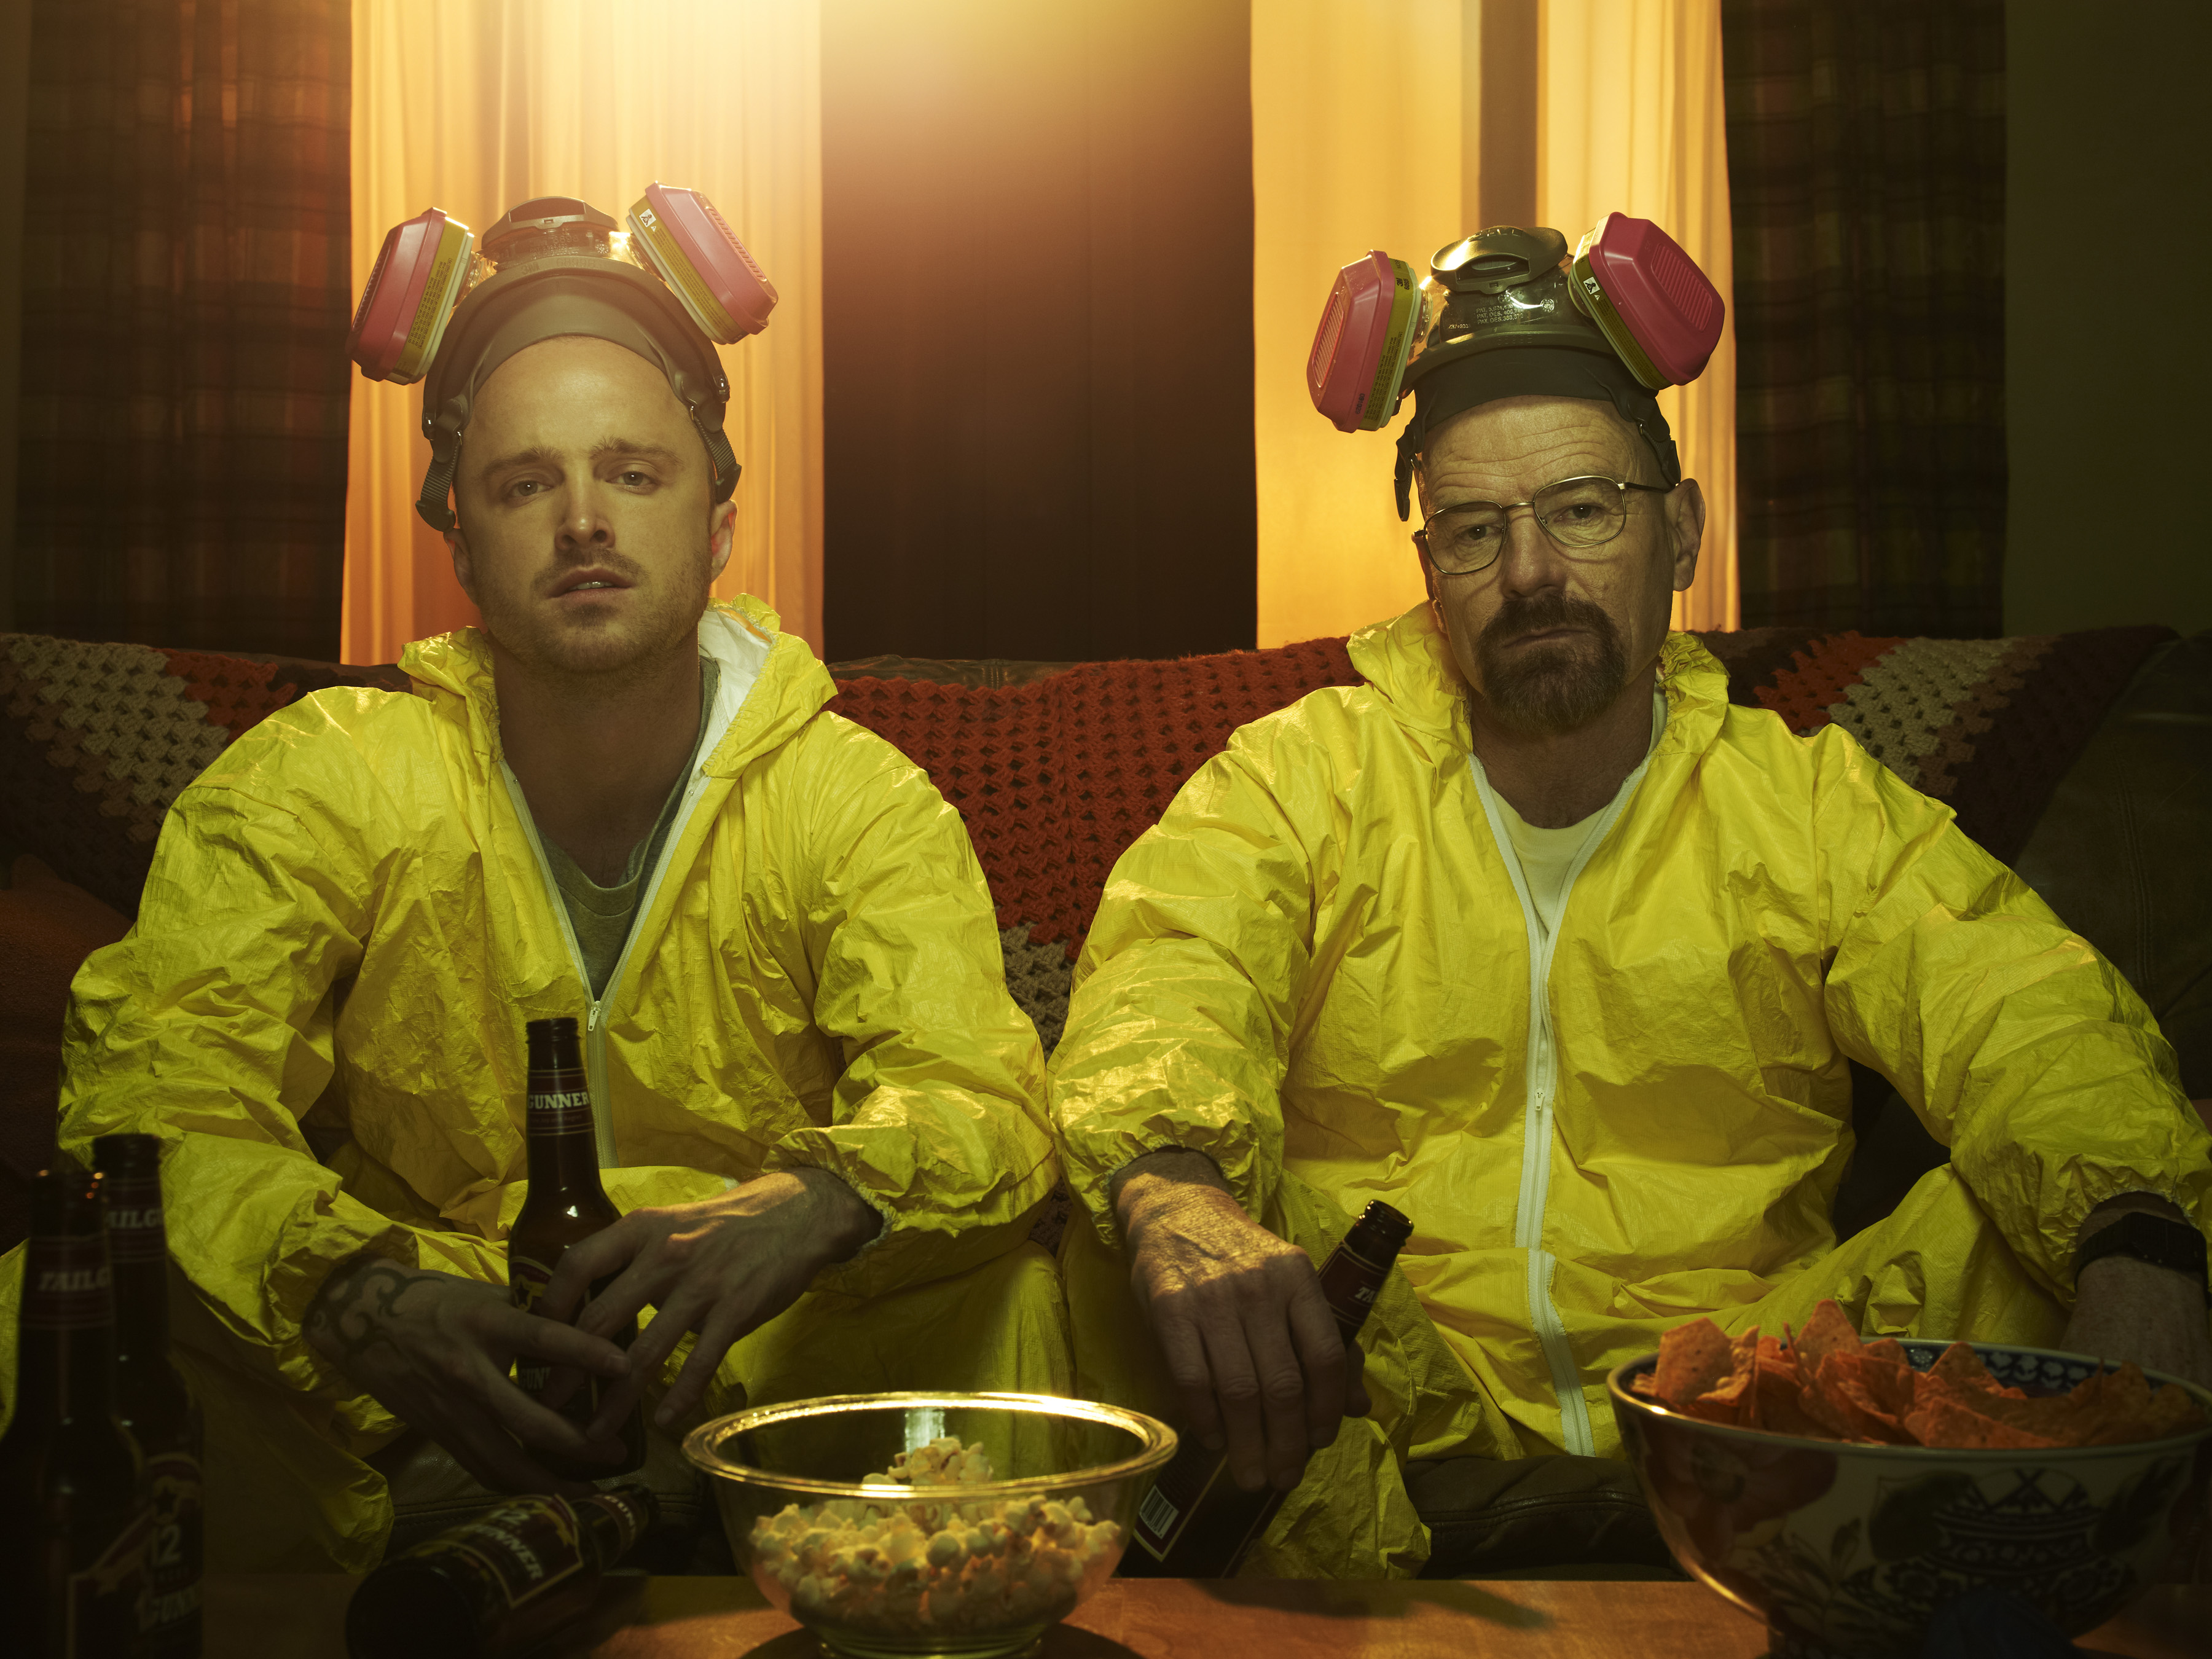 190+ Breaking Bad HD Wallpapers and Backgrounds